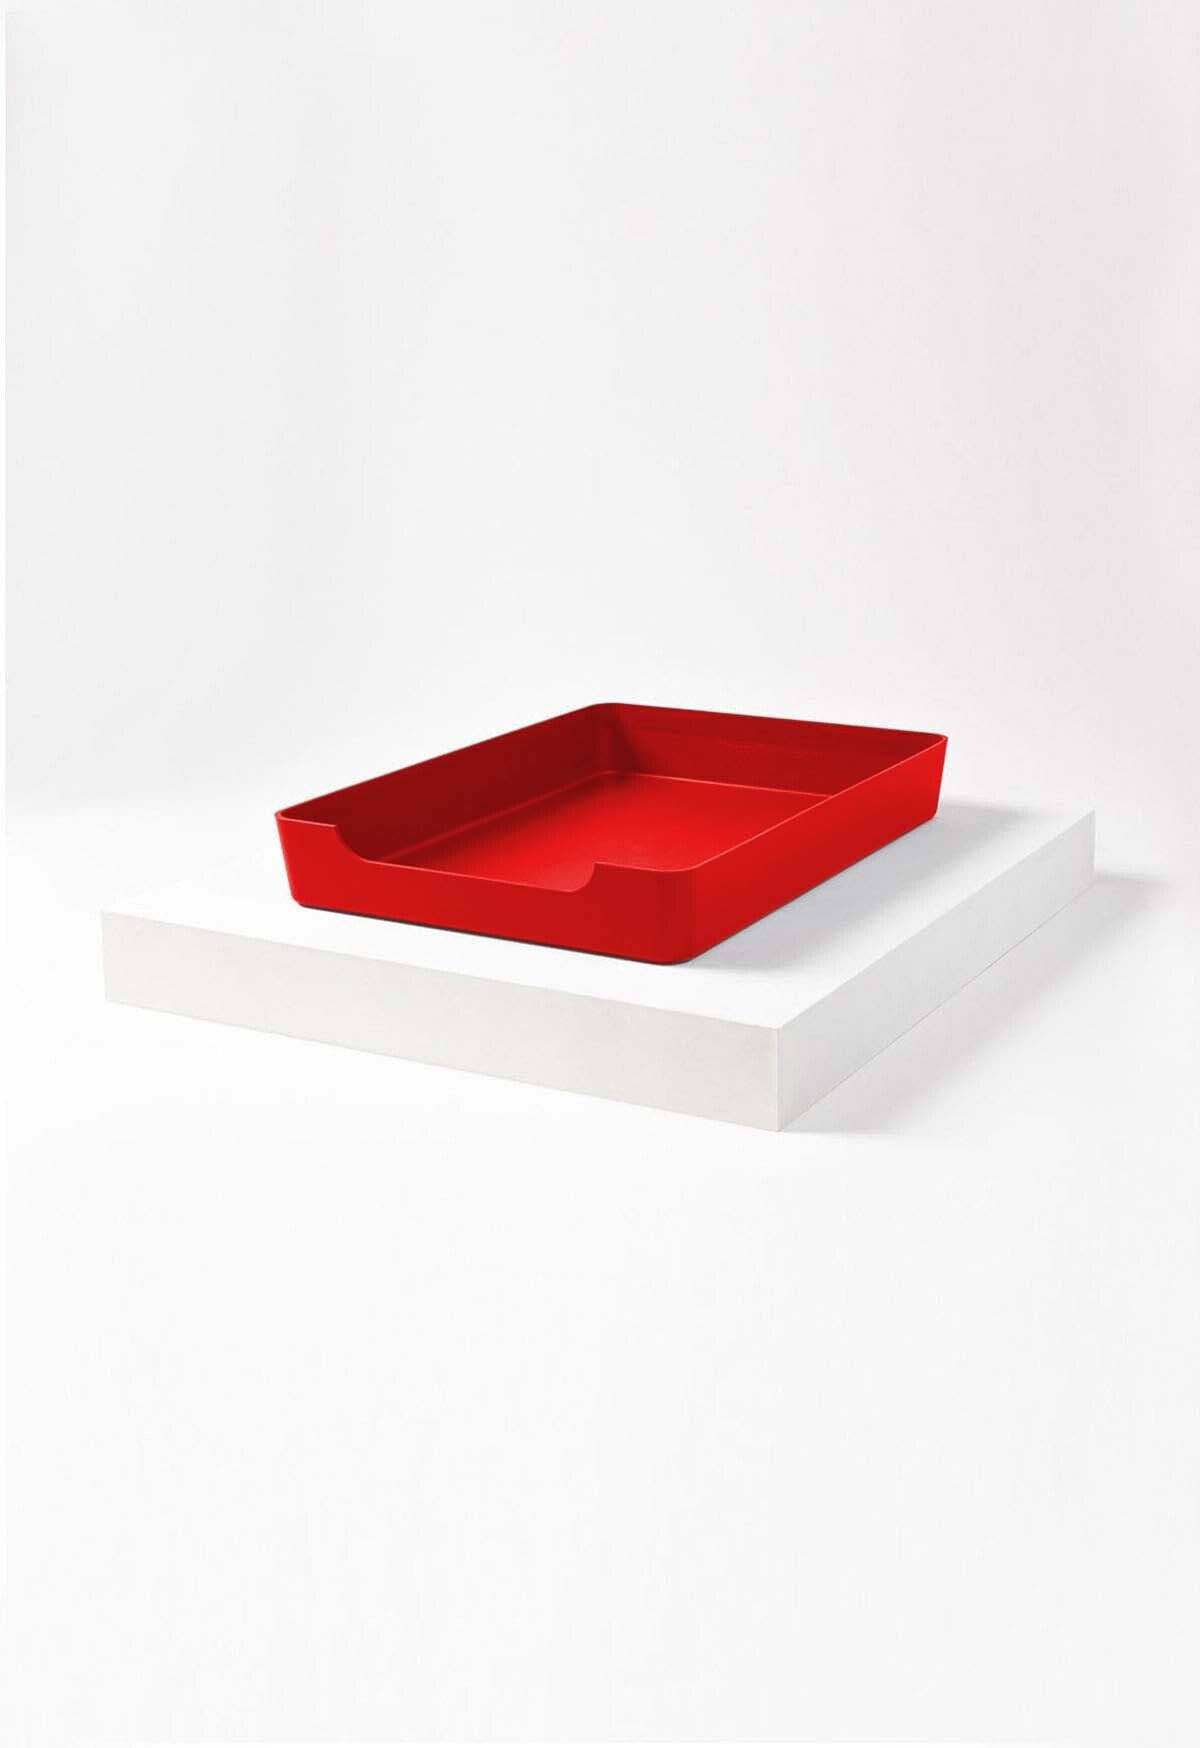 Imperfect Tray (40% OFF)